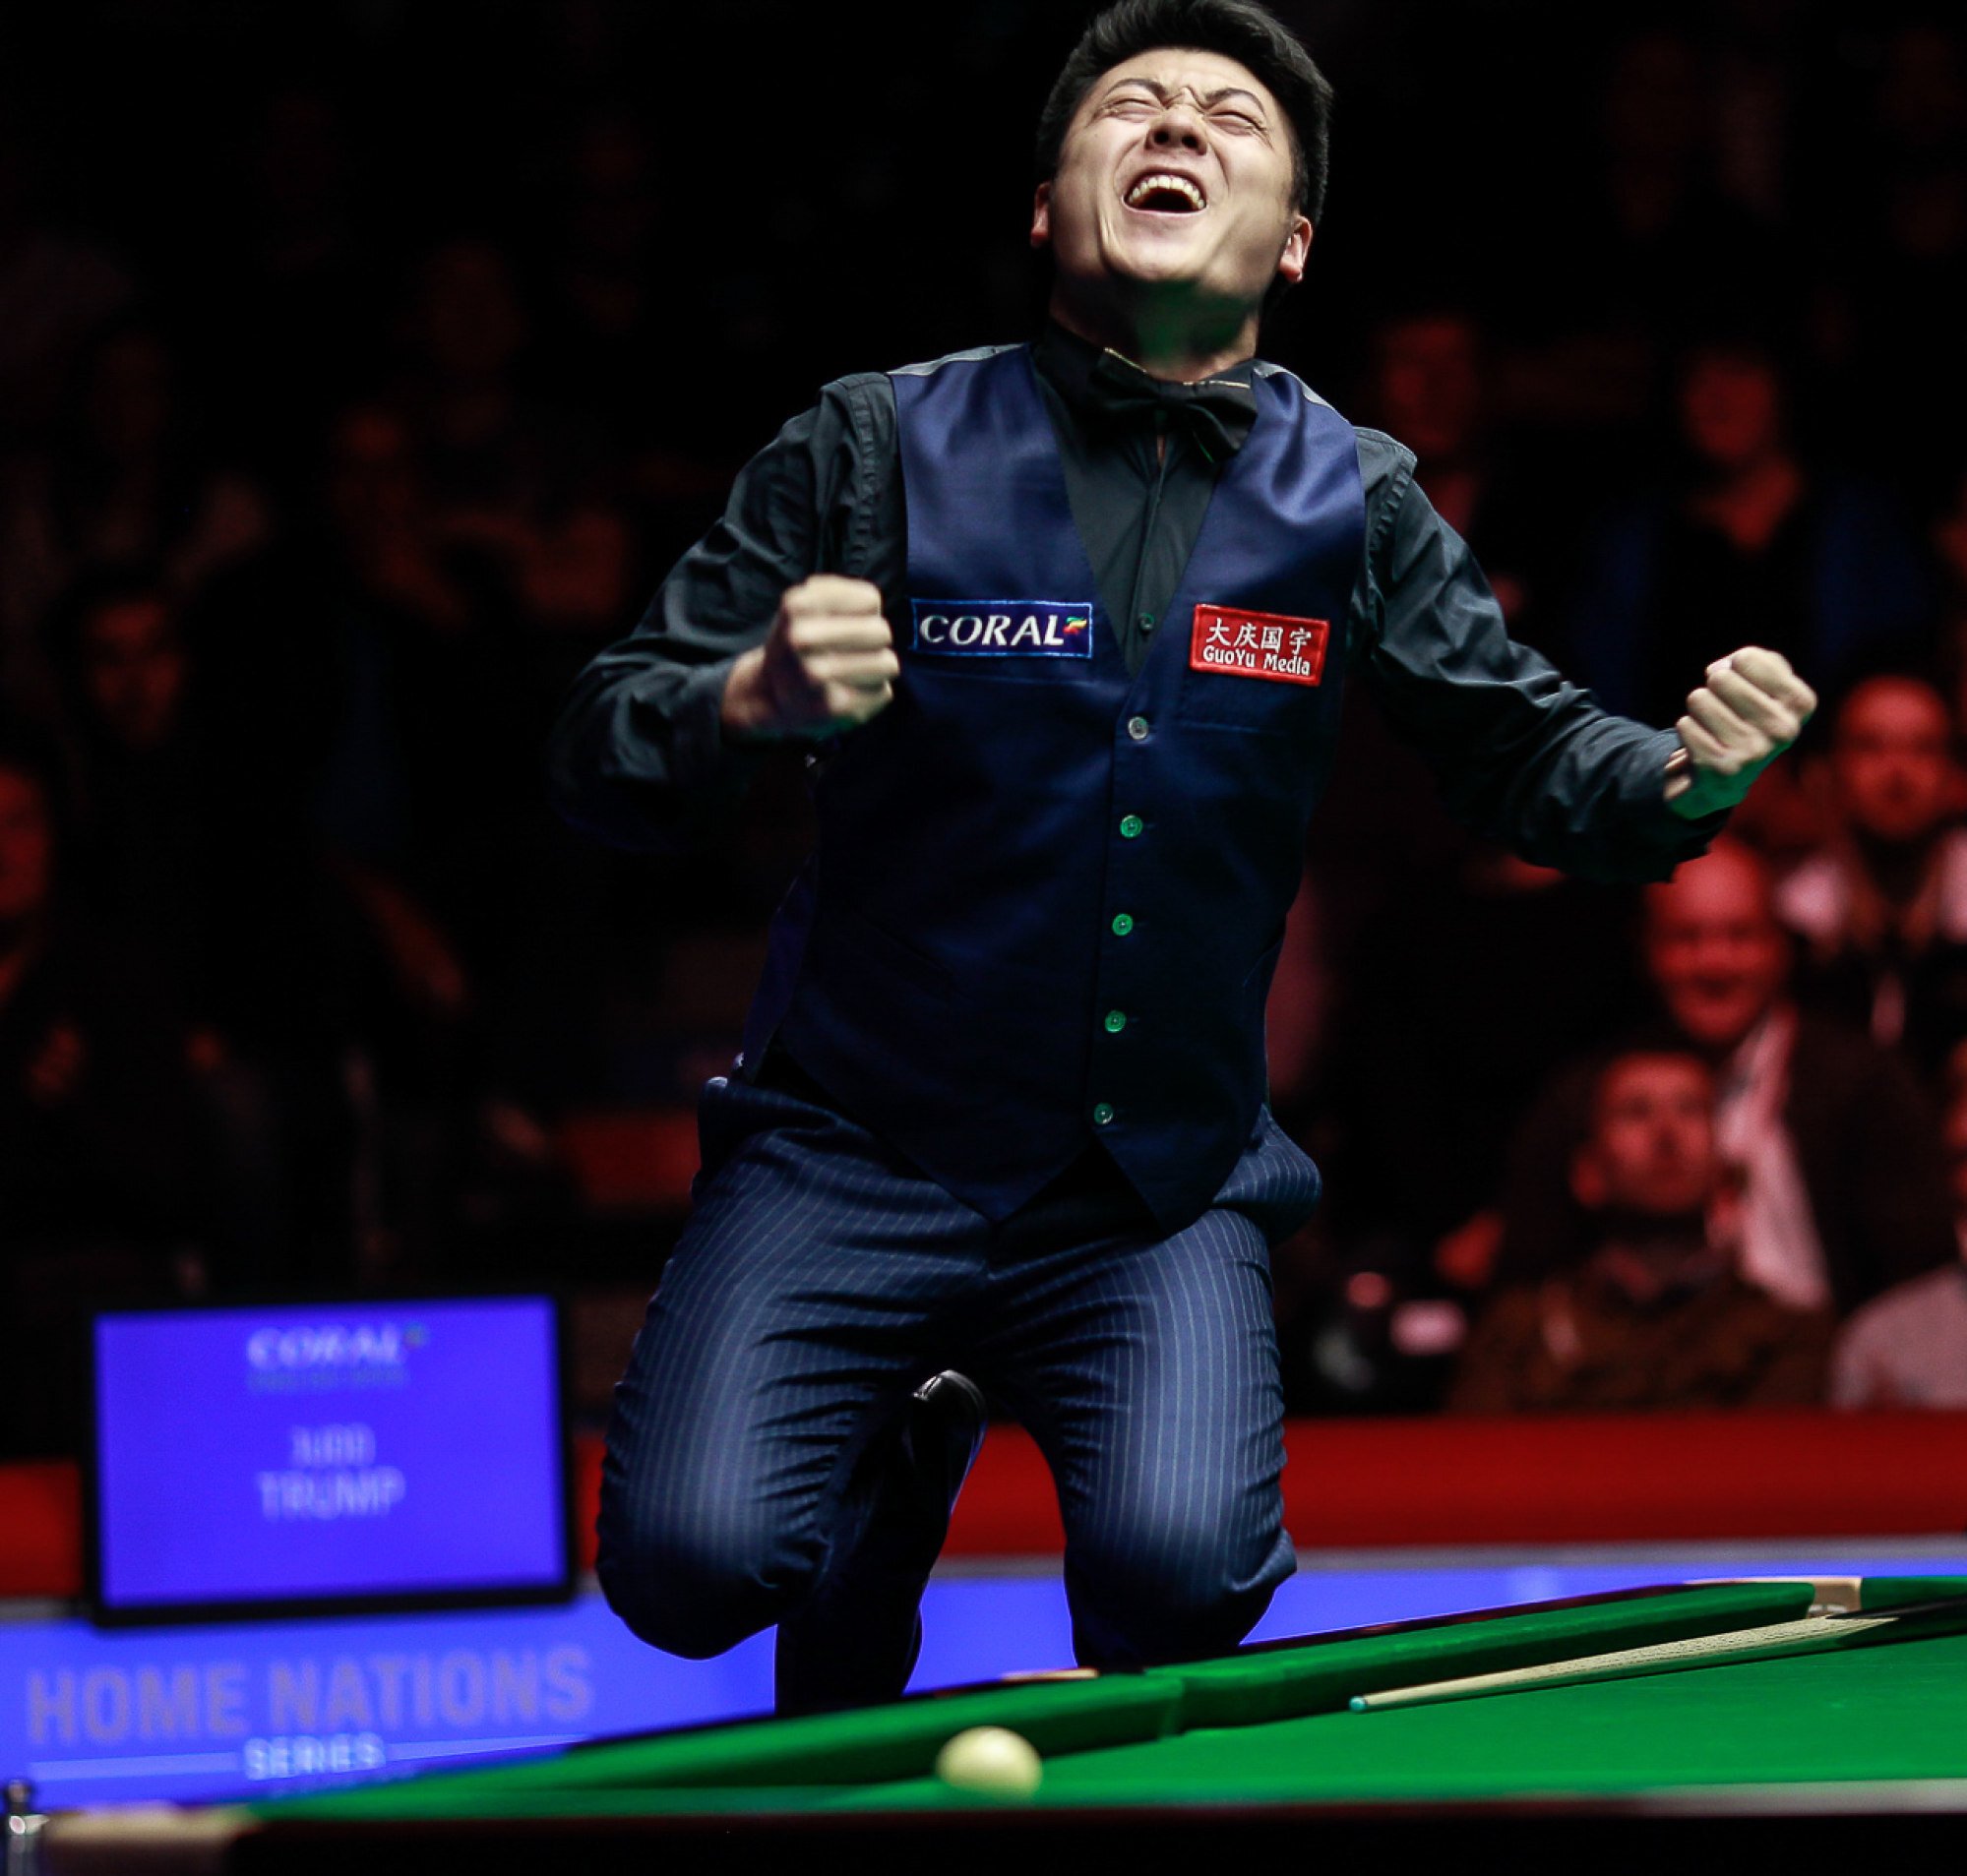 Chinas 4 contenders at 2022 World Snooker Championship who are they and how can I watch them? South China Morning Post